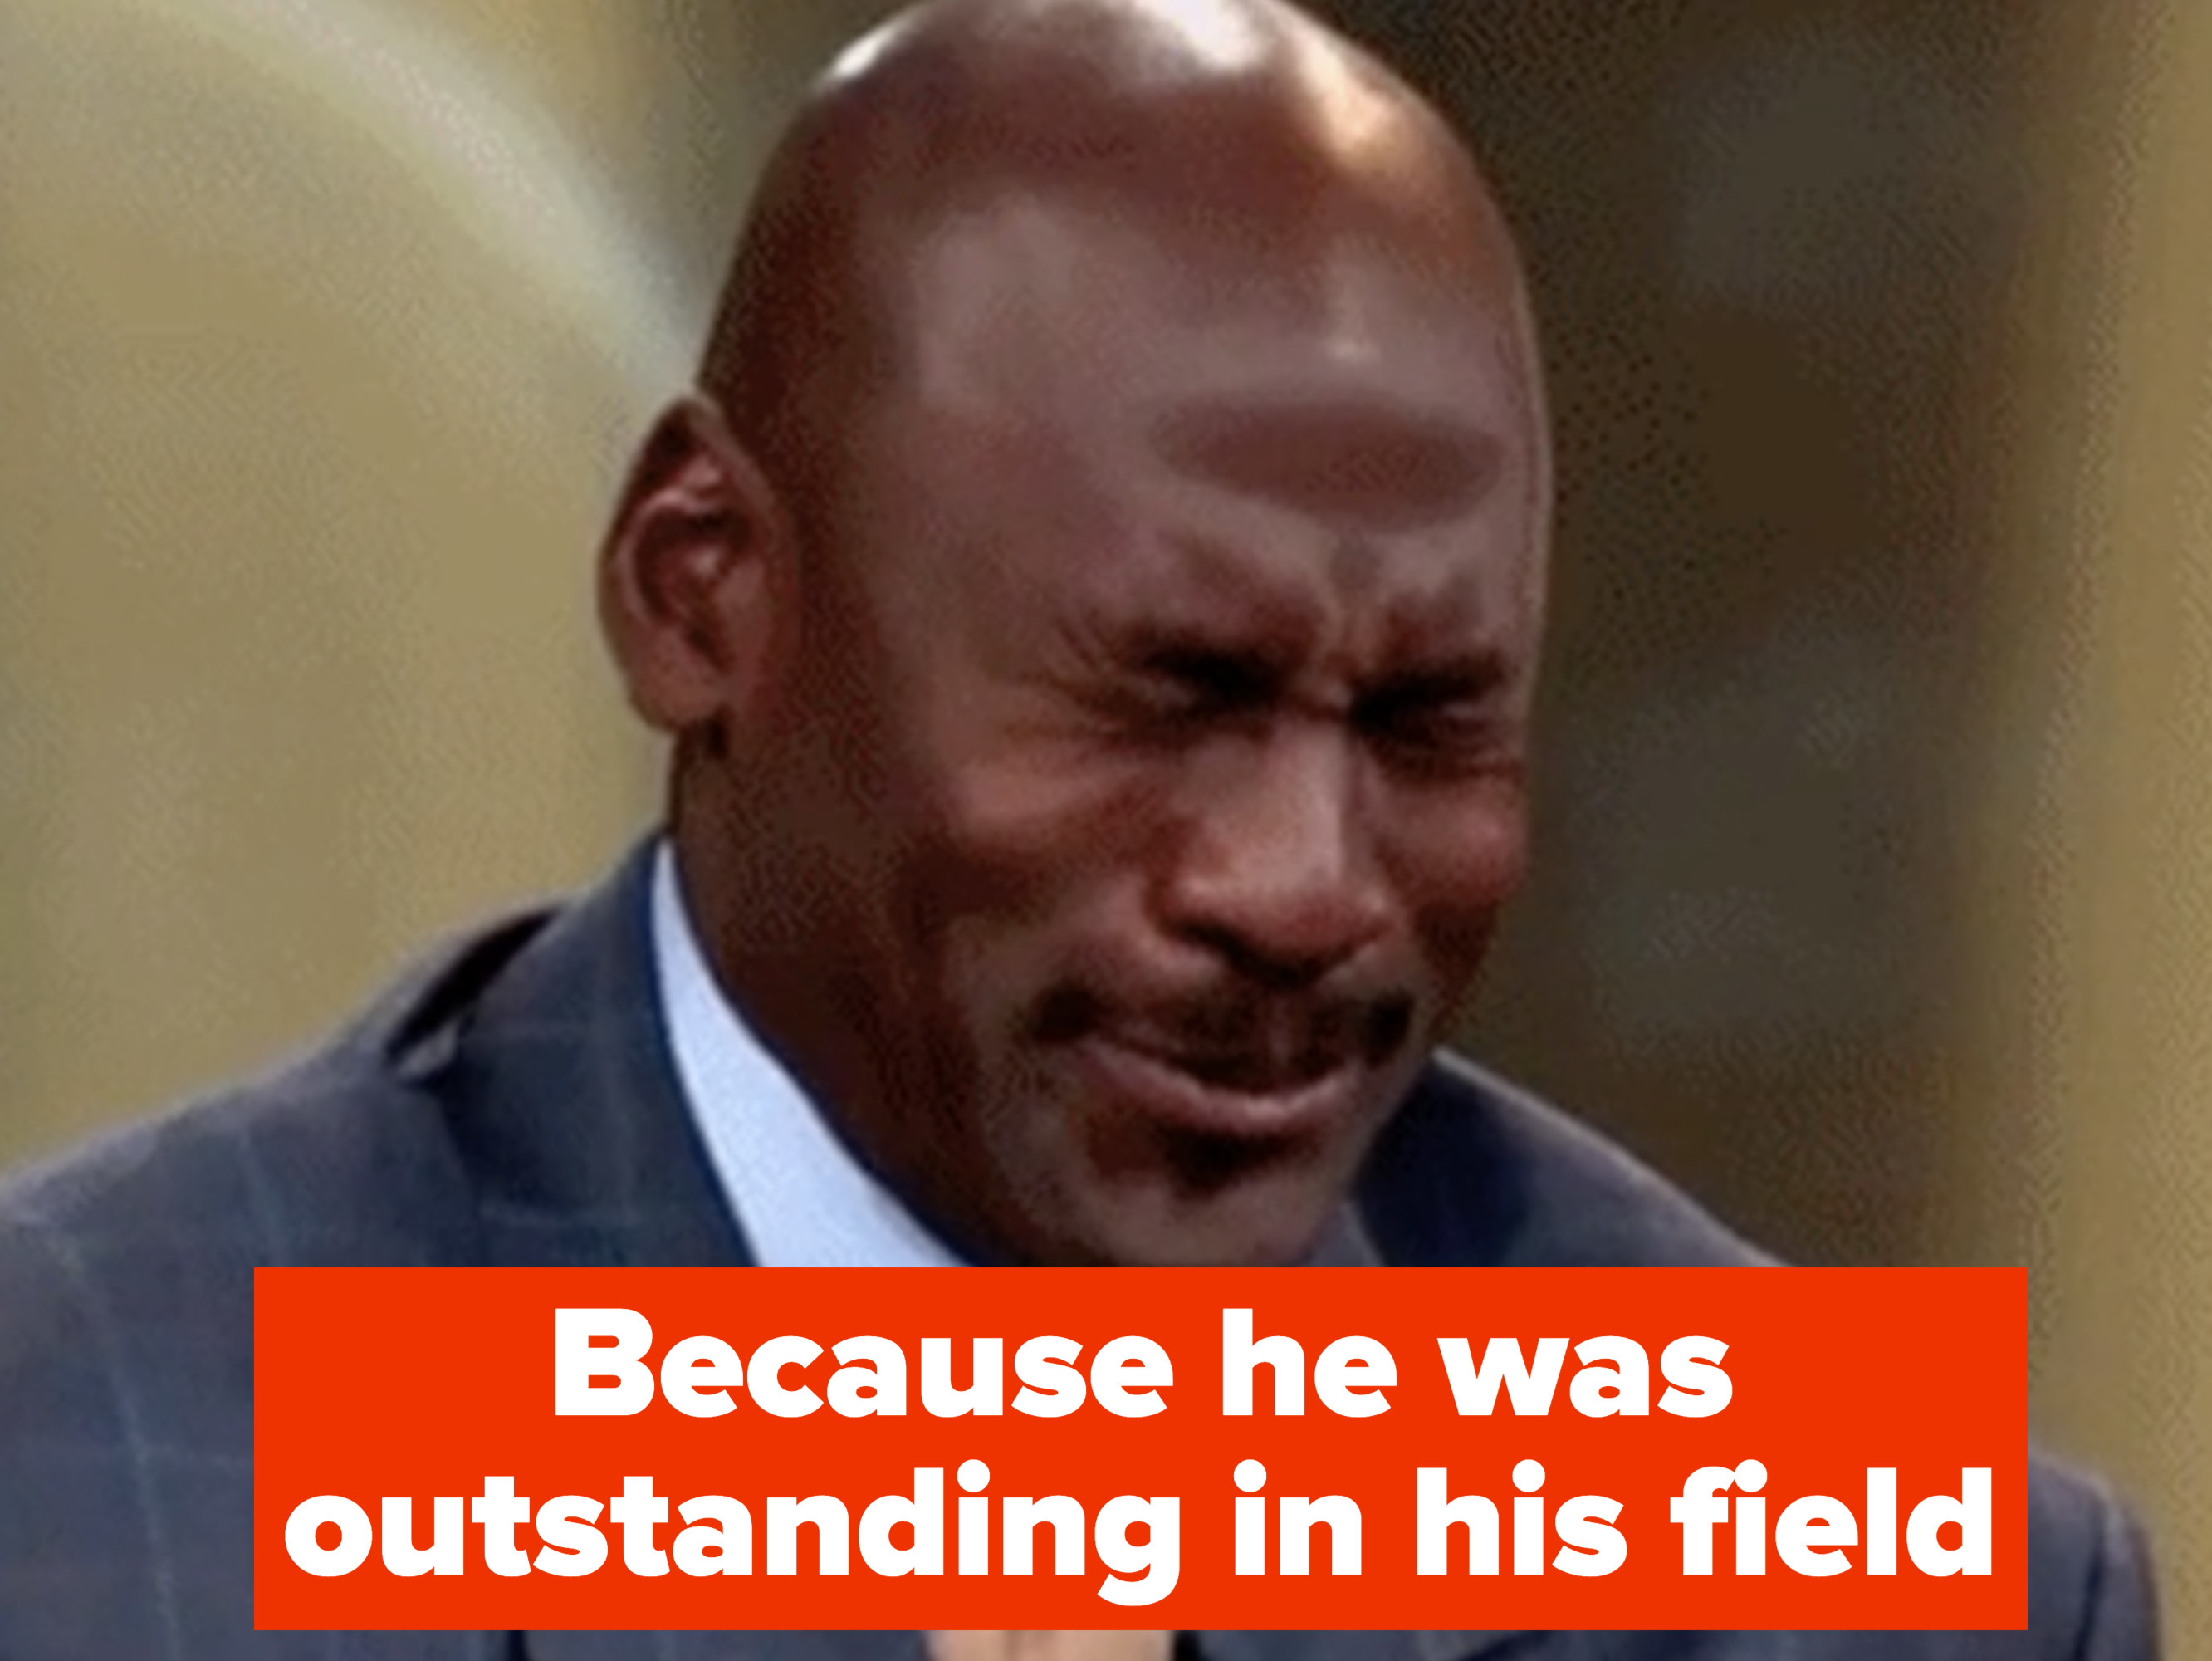 Because he was outstanding in his field